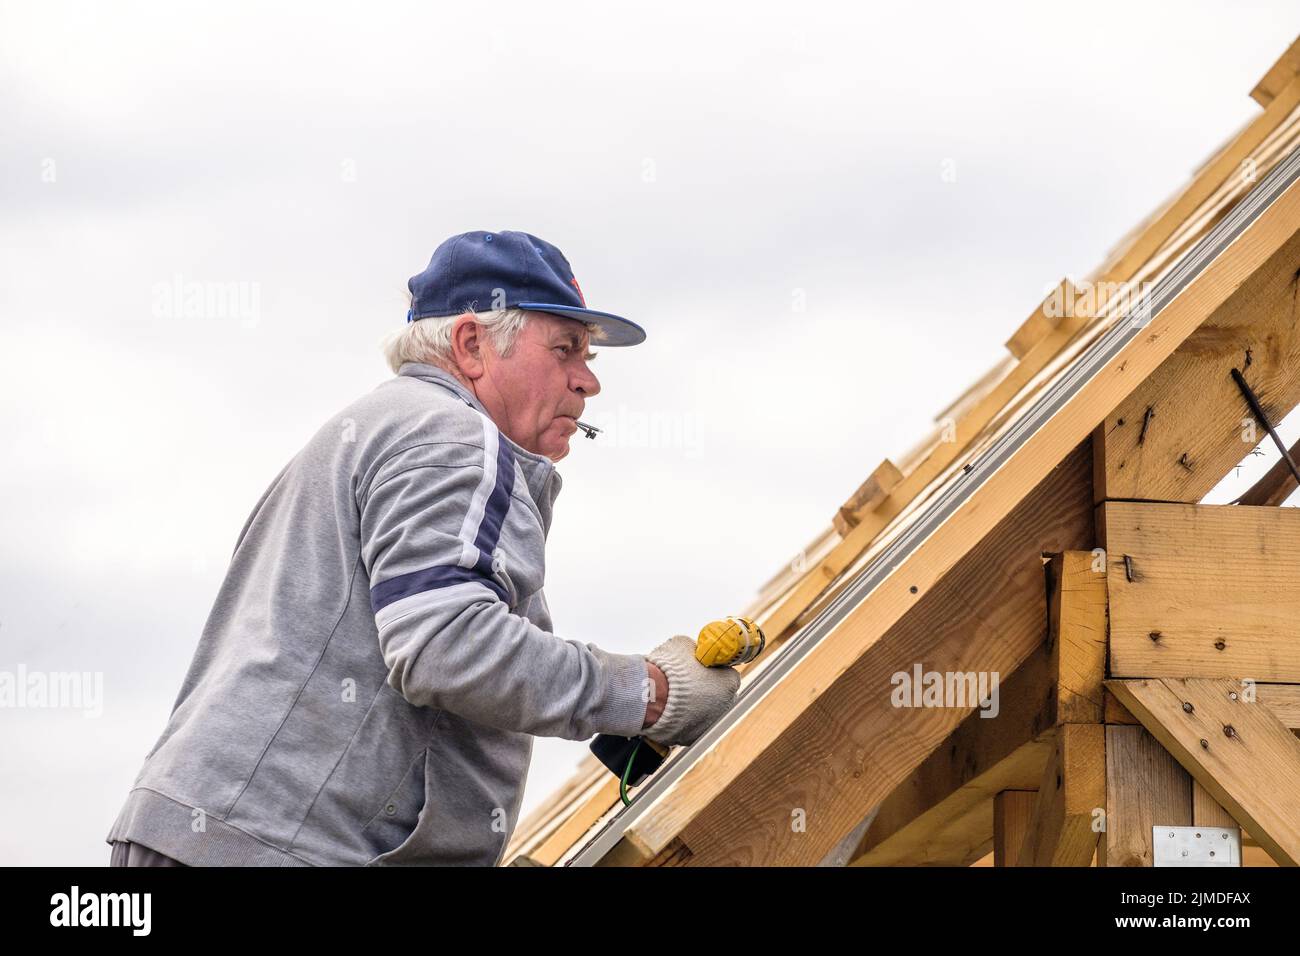 Male Hands In Gloves With A Screwdriver Screw The Roofing Sheet To The Roof  Stock Photo - Download Image Now - iStock